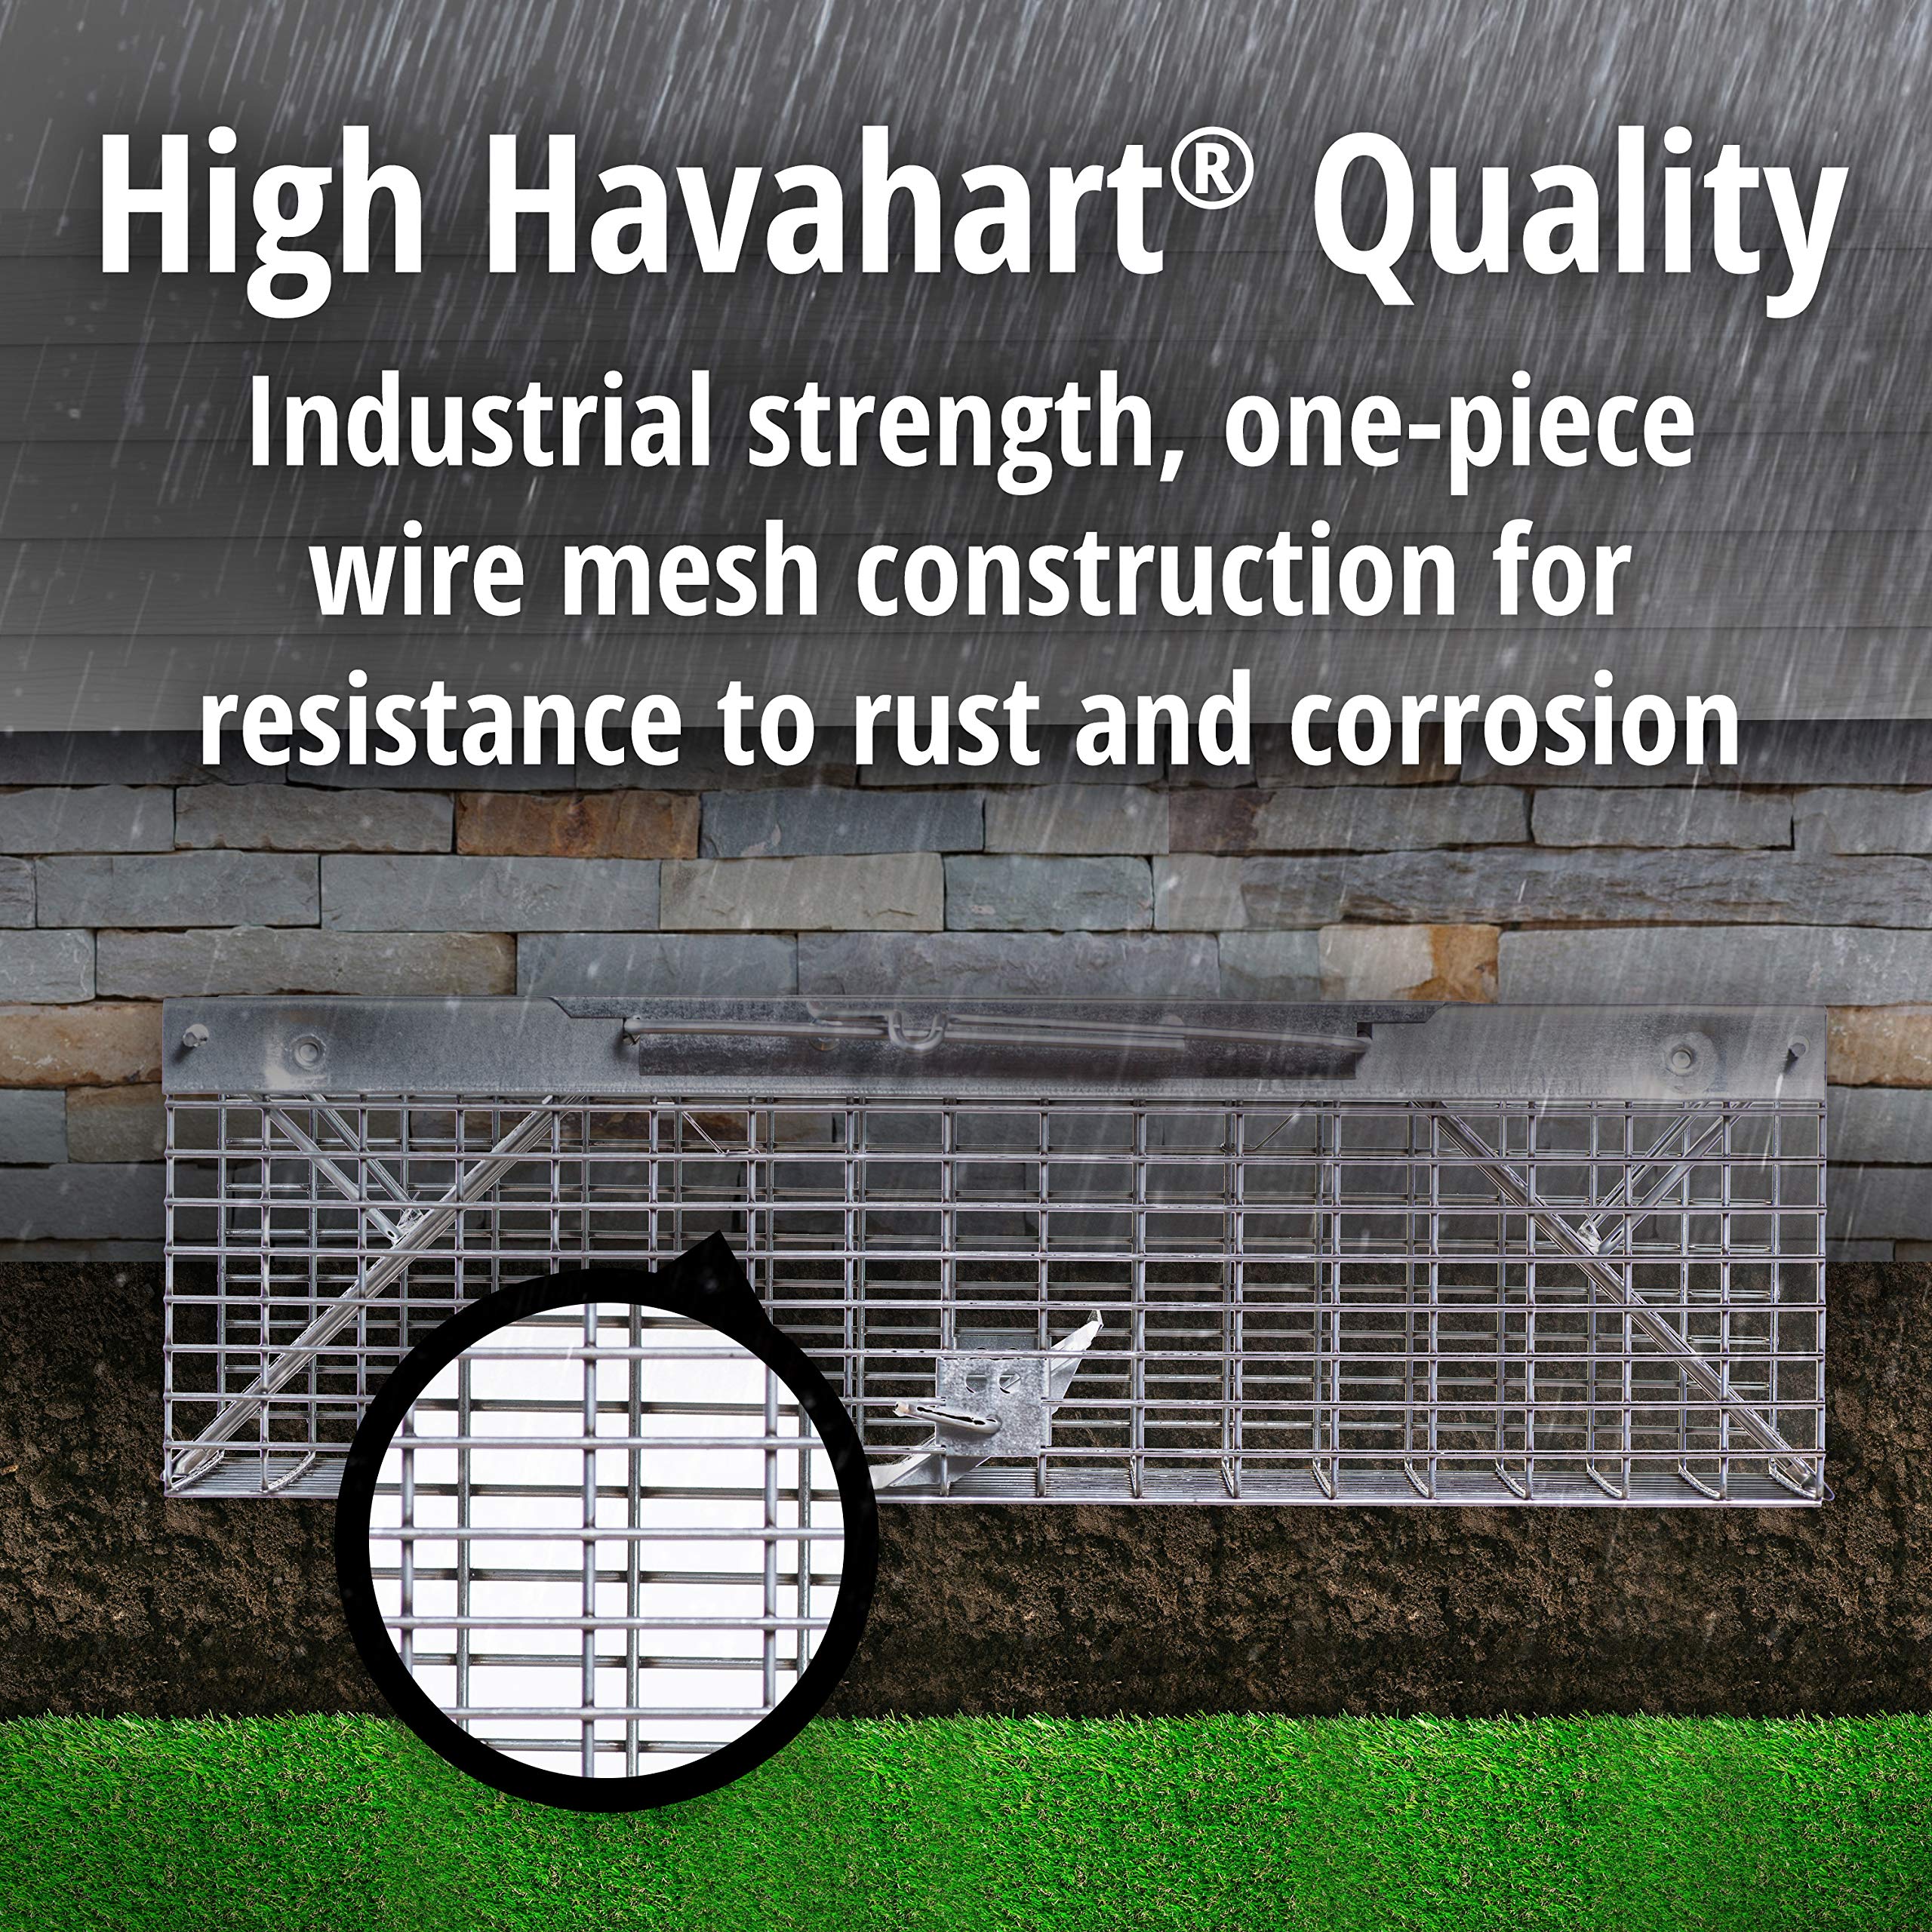 Havahart 1025 Small 2-Door Humane Catch and Release Live Animal Trap for Squirrels, Chipmunks, Rats, Weasels, and Small Animals